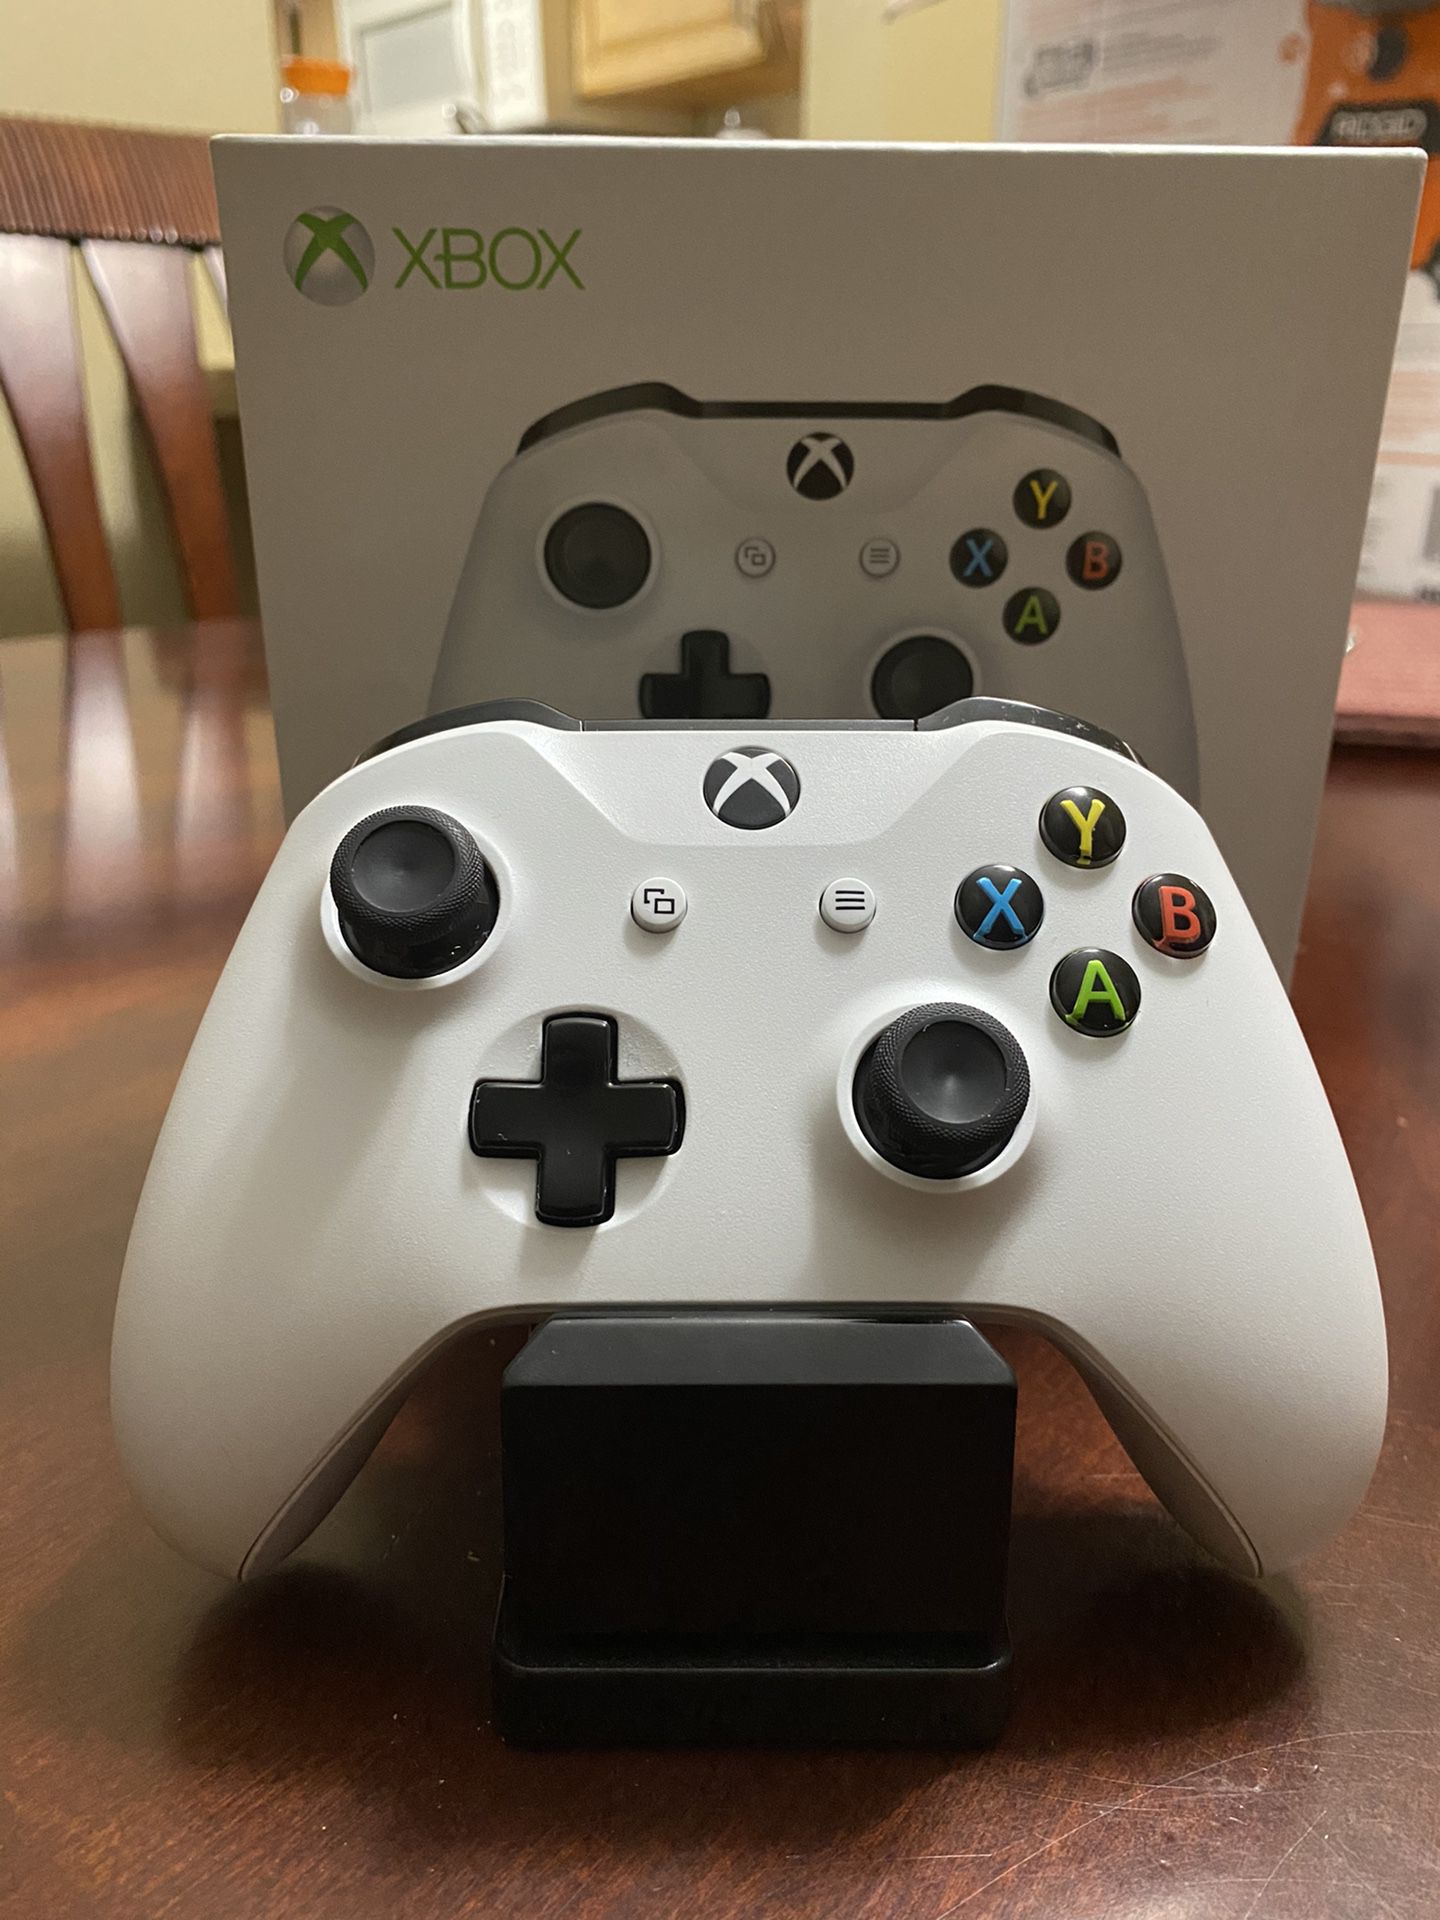 Xbox Controller for PC or XBOX with rechargeable batteries